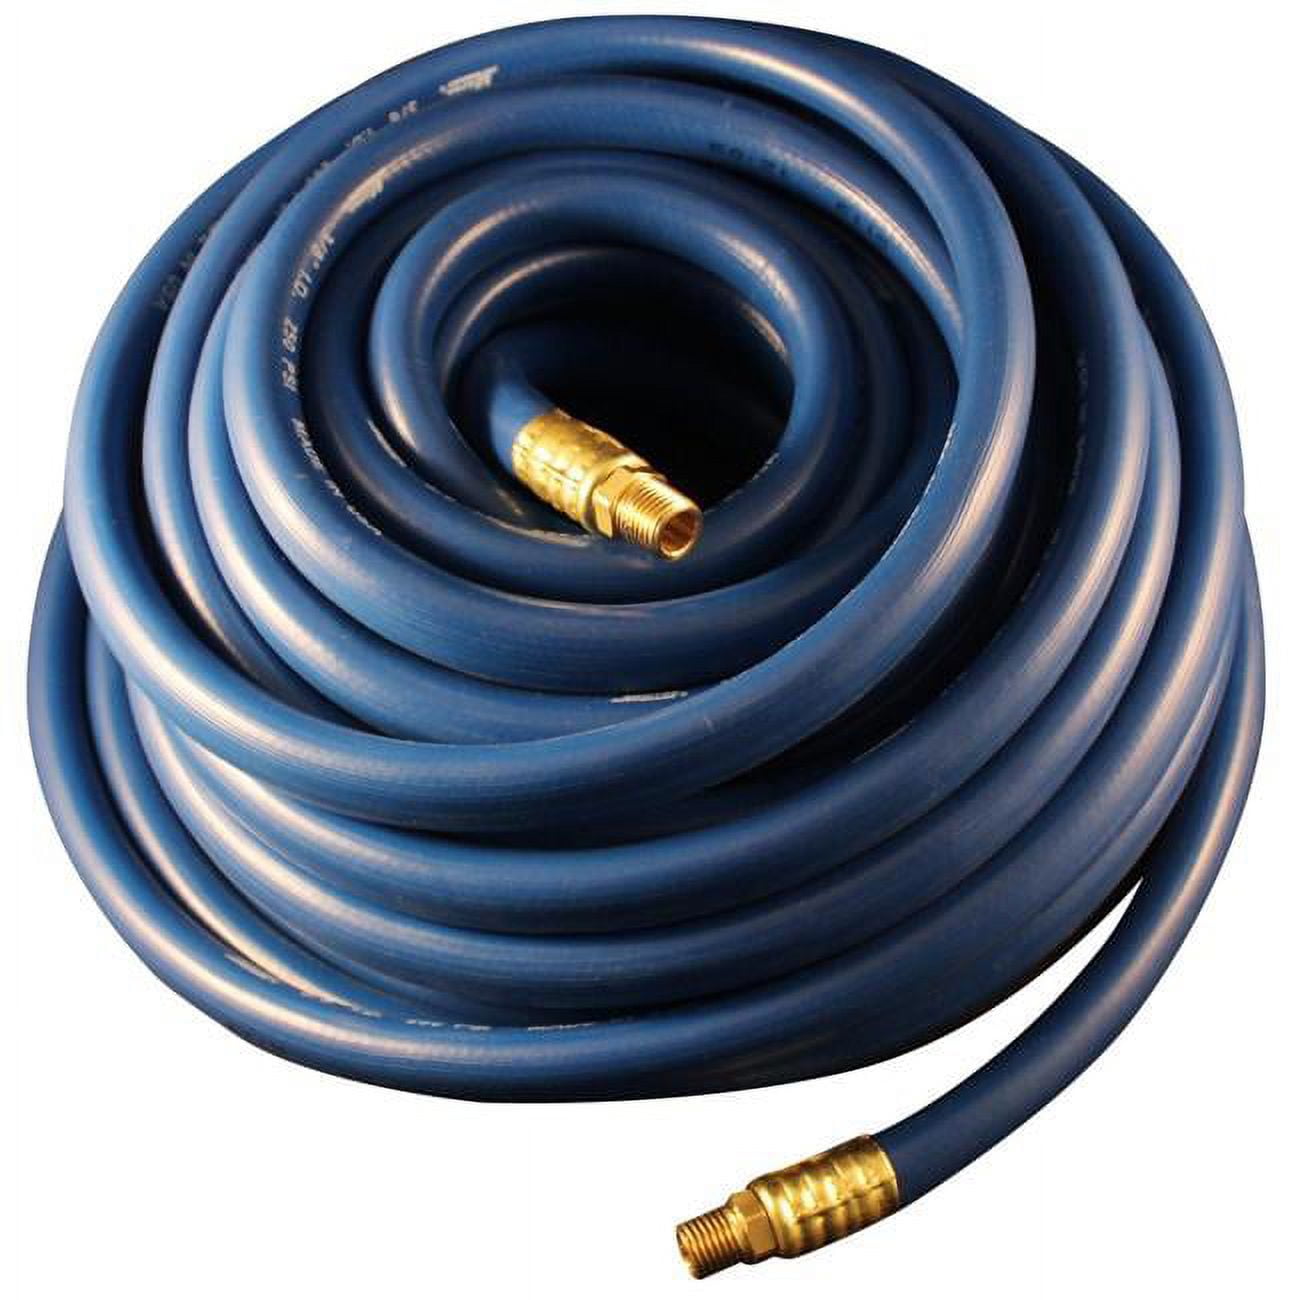 Forney 75410 PVC Air Hose, 3/8x 25', Yellow